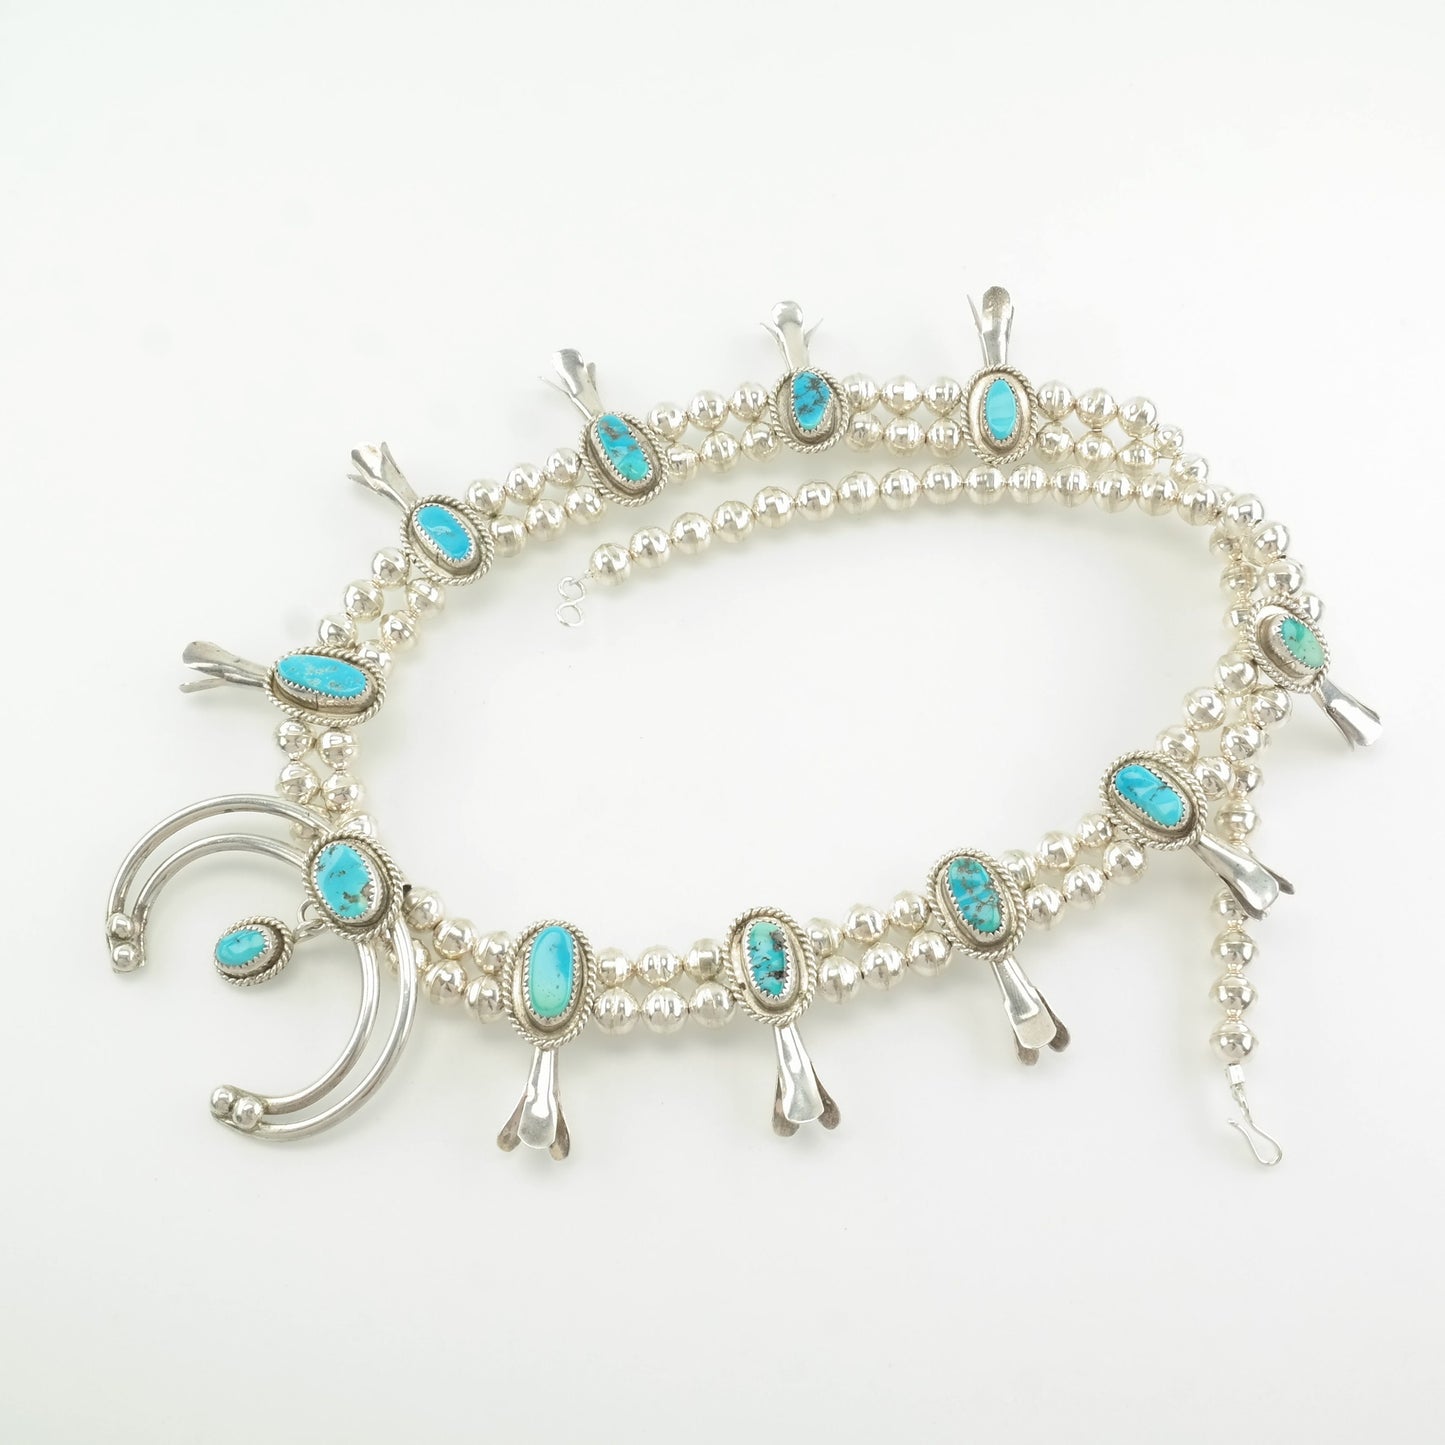 Vintage Native American Sterling Silver Blue Turquoise Sleeping Beauty Squash Blossom Necklace